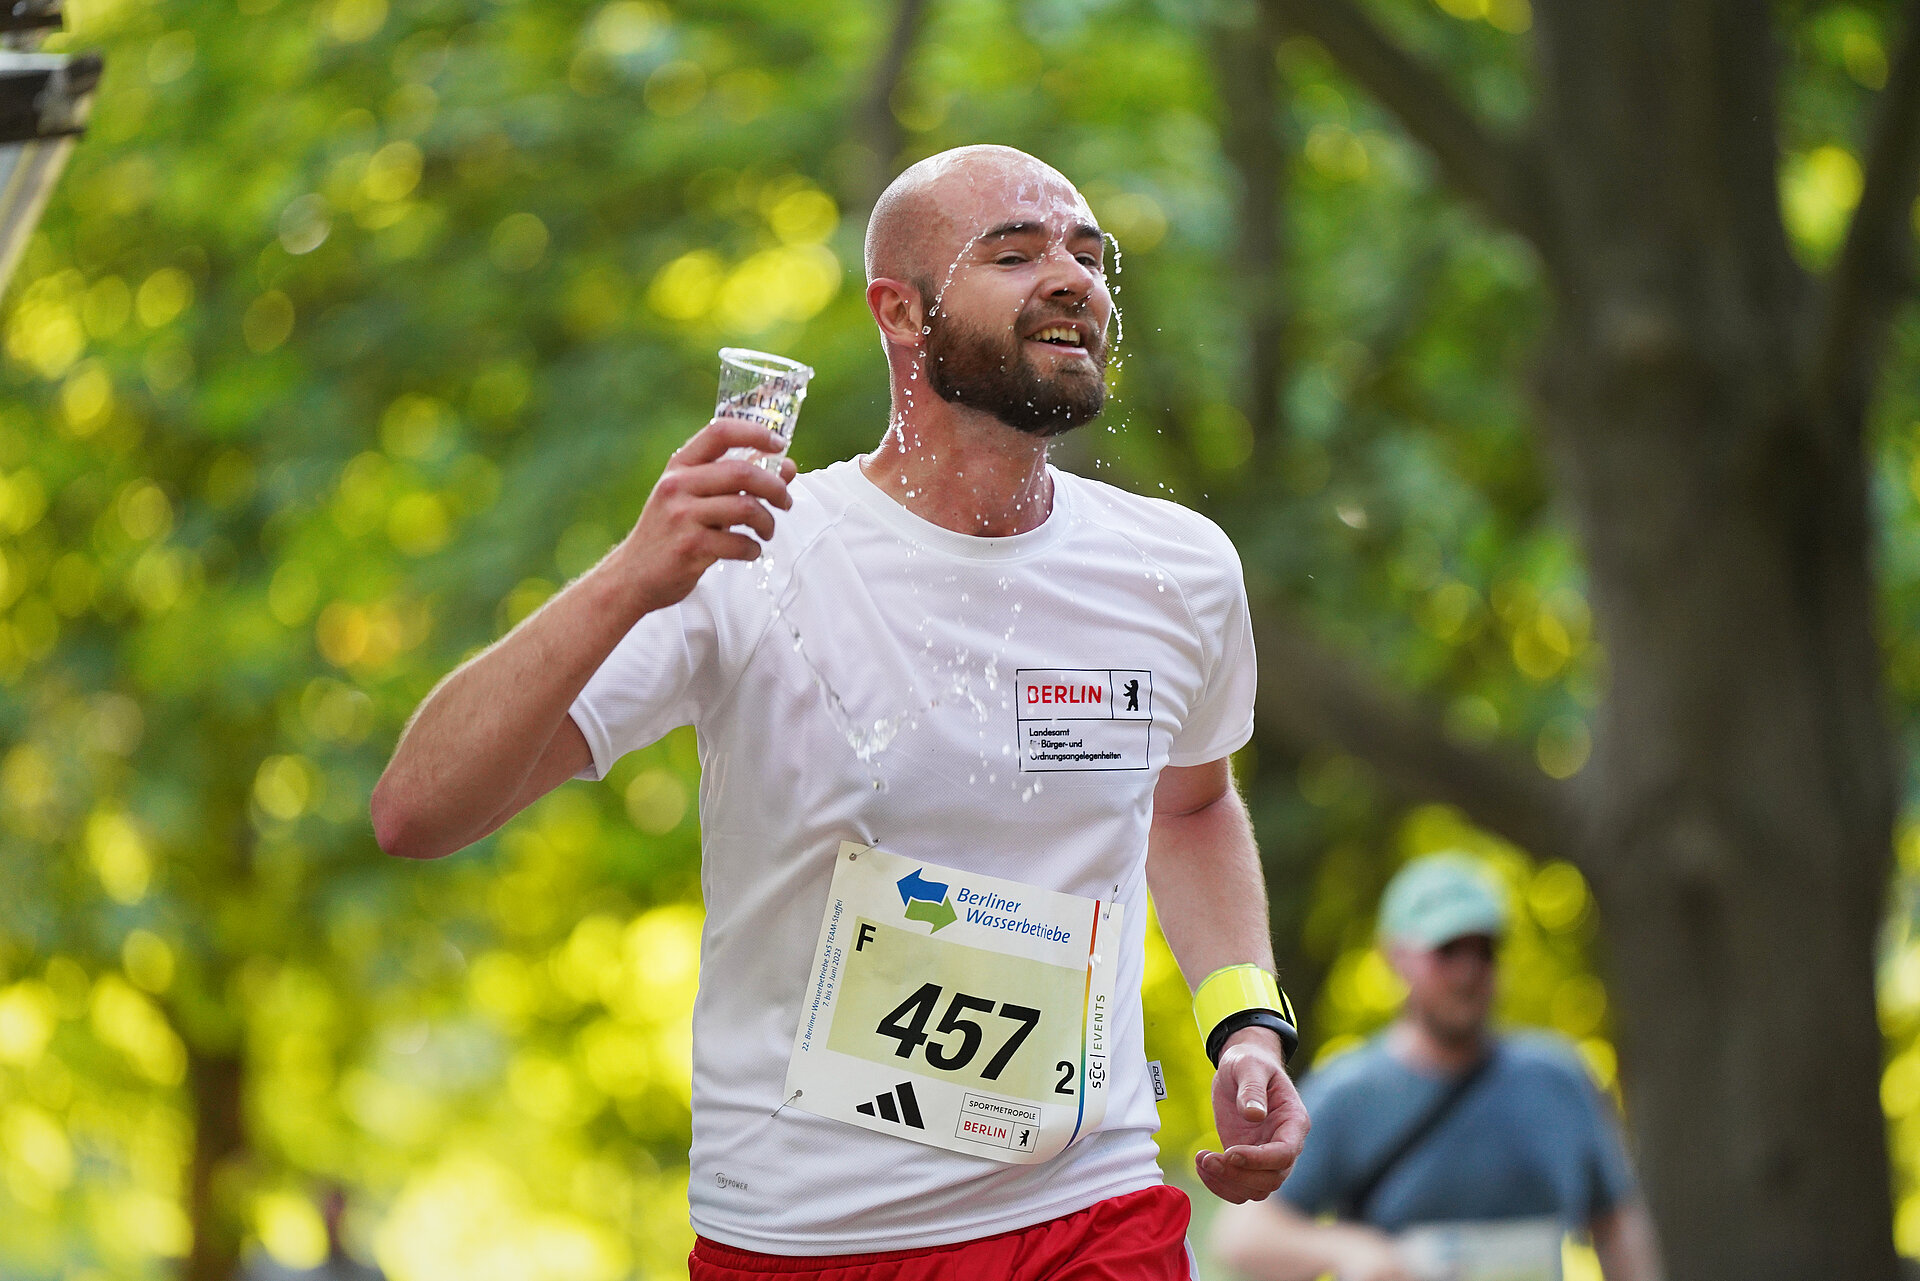 5x5 km TEAM relay: Male runner pours water into his face from a cup @ SCC EVENTS / Kai Wiechmann